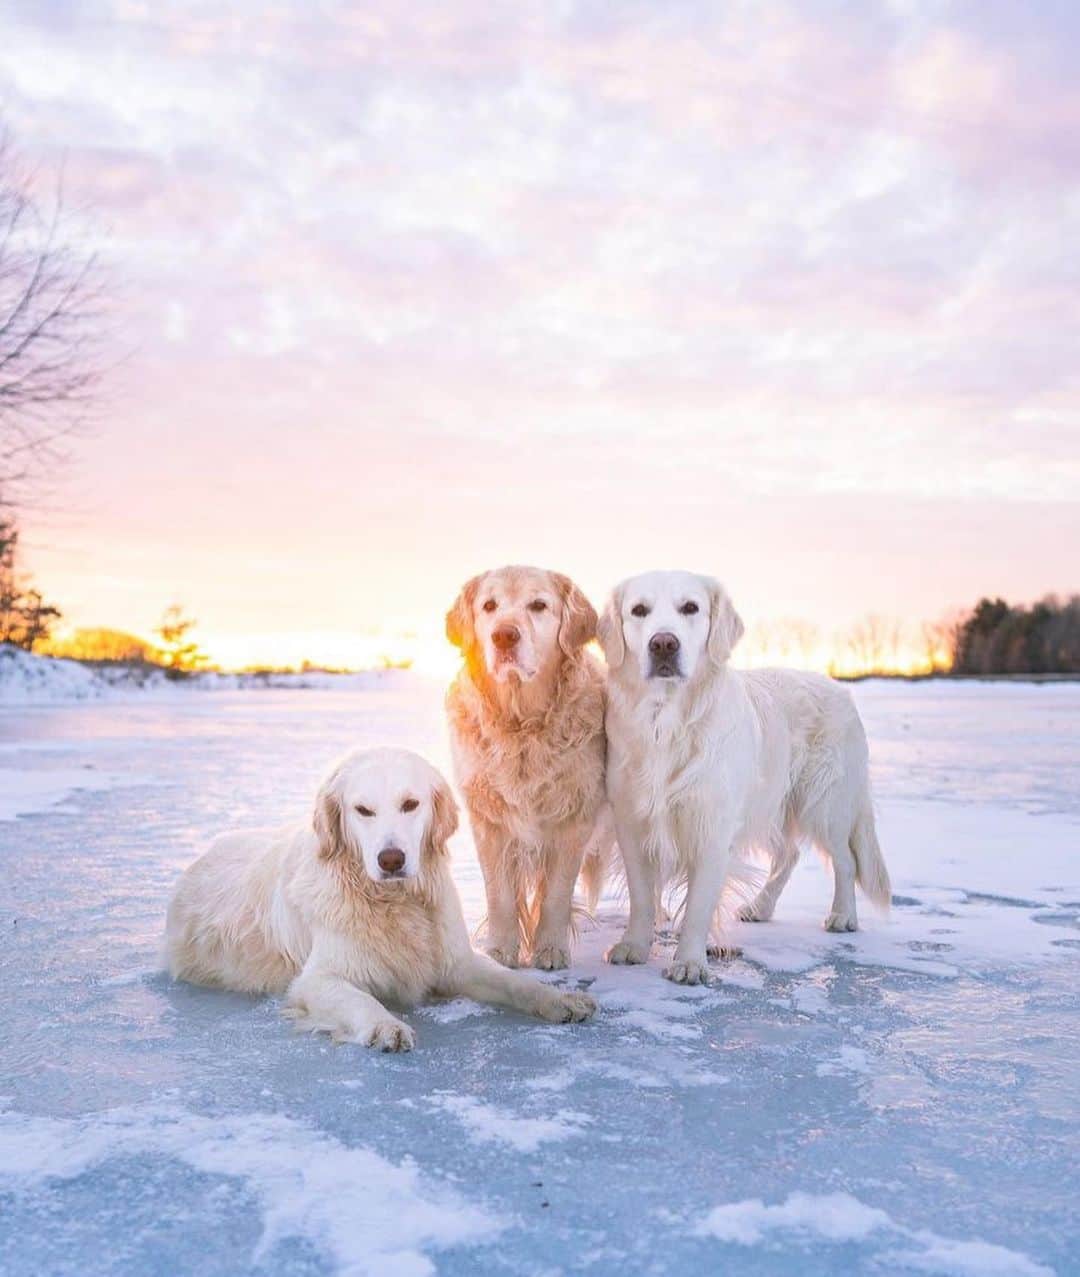 Bolt and Keelのインスタグラム：「These Wild Goldens live for the Michigan adventure 🌊🌲  @adventrapets ➡️ @wildgoldens  —————————————————— Follow @adventrapets to meet cute, brave and inspiring adventure pets from all over the world! 🌲🐶🐱🌲  • TAG US IN YOUR POSTS to get your little adventurer featured! #adventrapets ——————————————————」